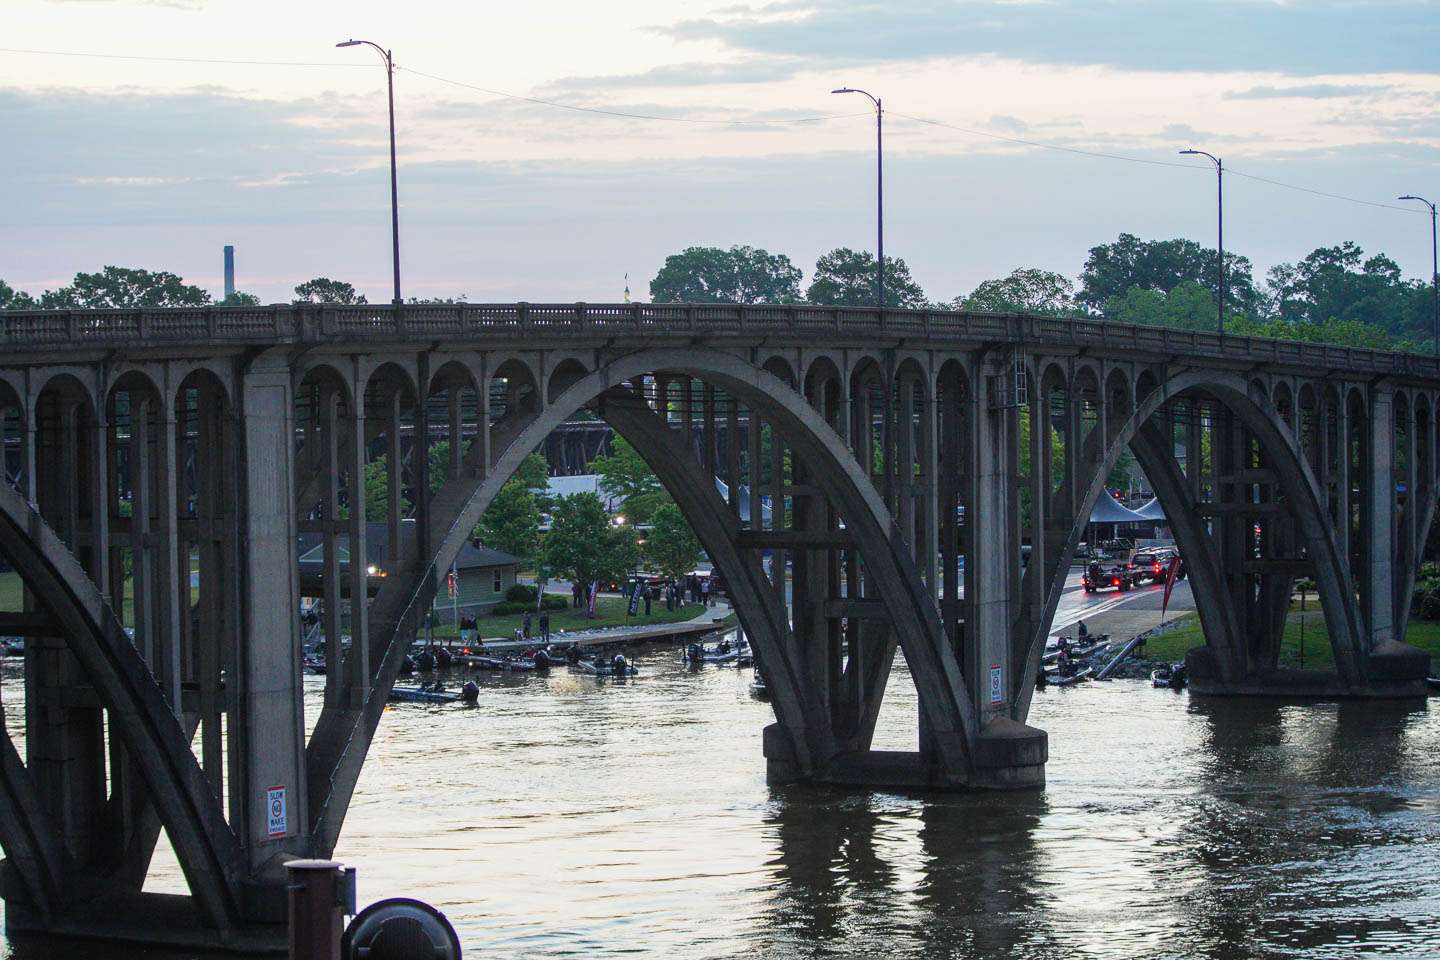 Over and under bridges, Chris Mitchell set out to find a different view of the Whataburger Bassmaster Elite at Neely Henry takeoff from Coosa Landing.  